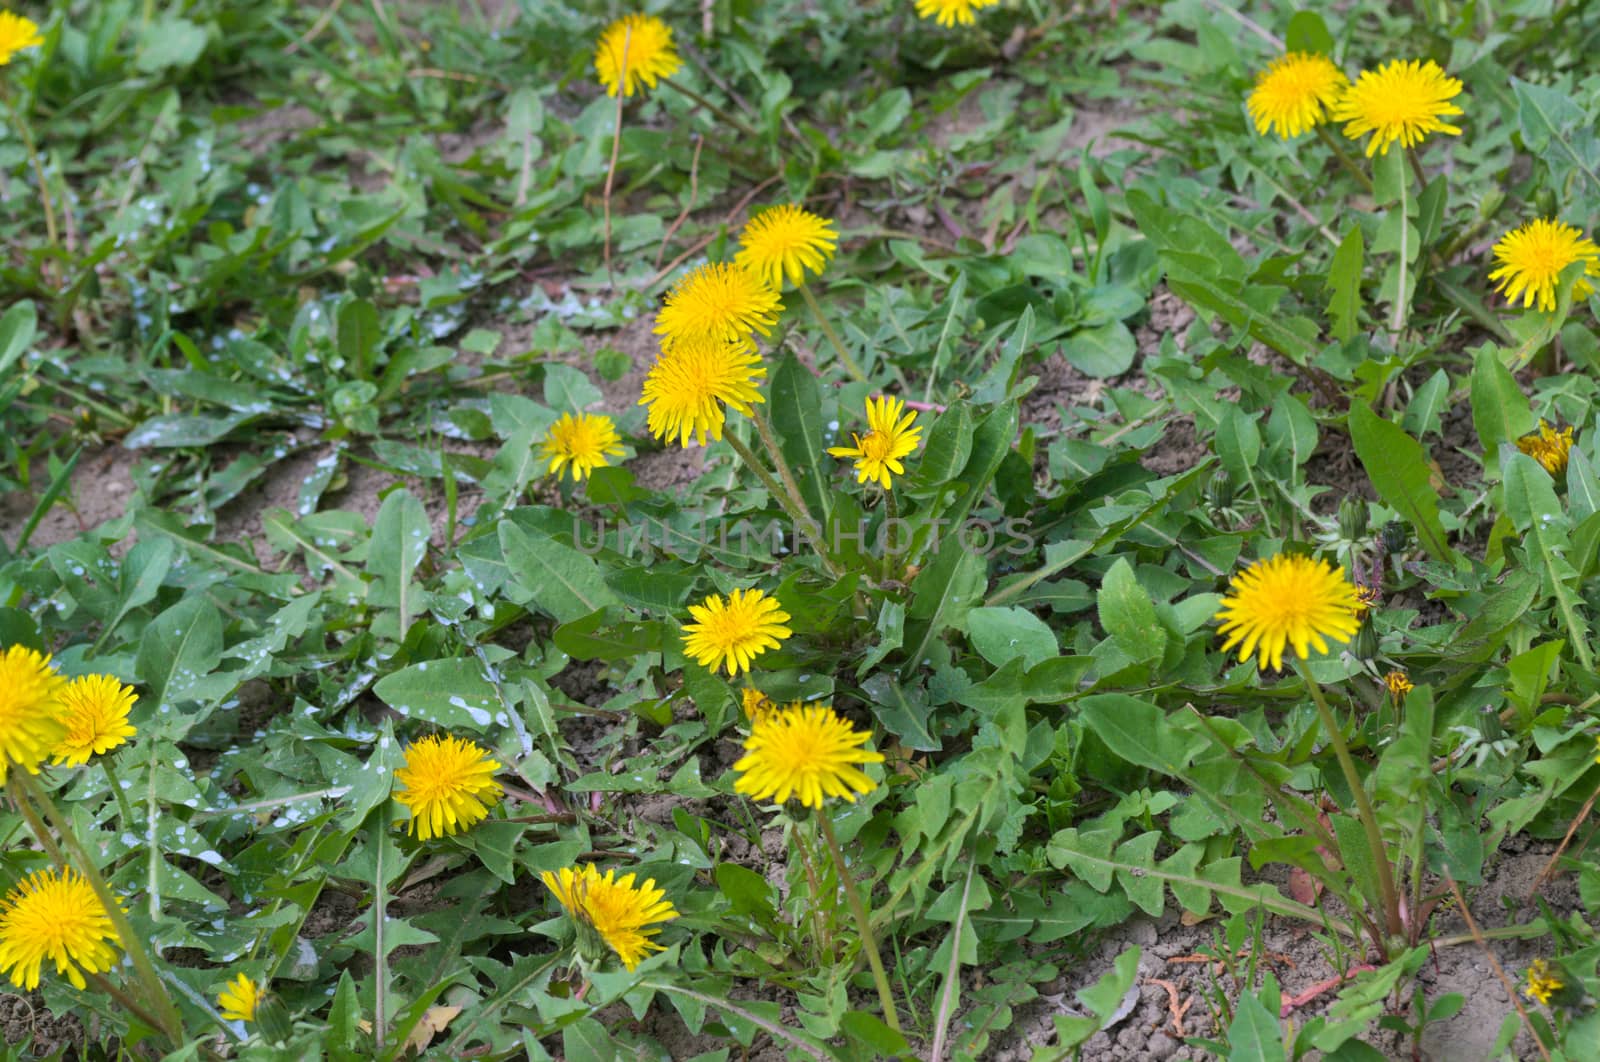 Dandelions blooming with yellow flowers at spring by sheriffkule